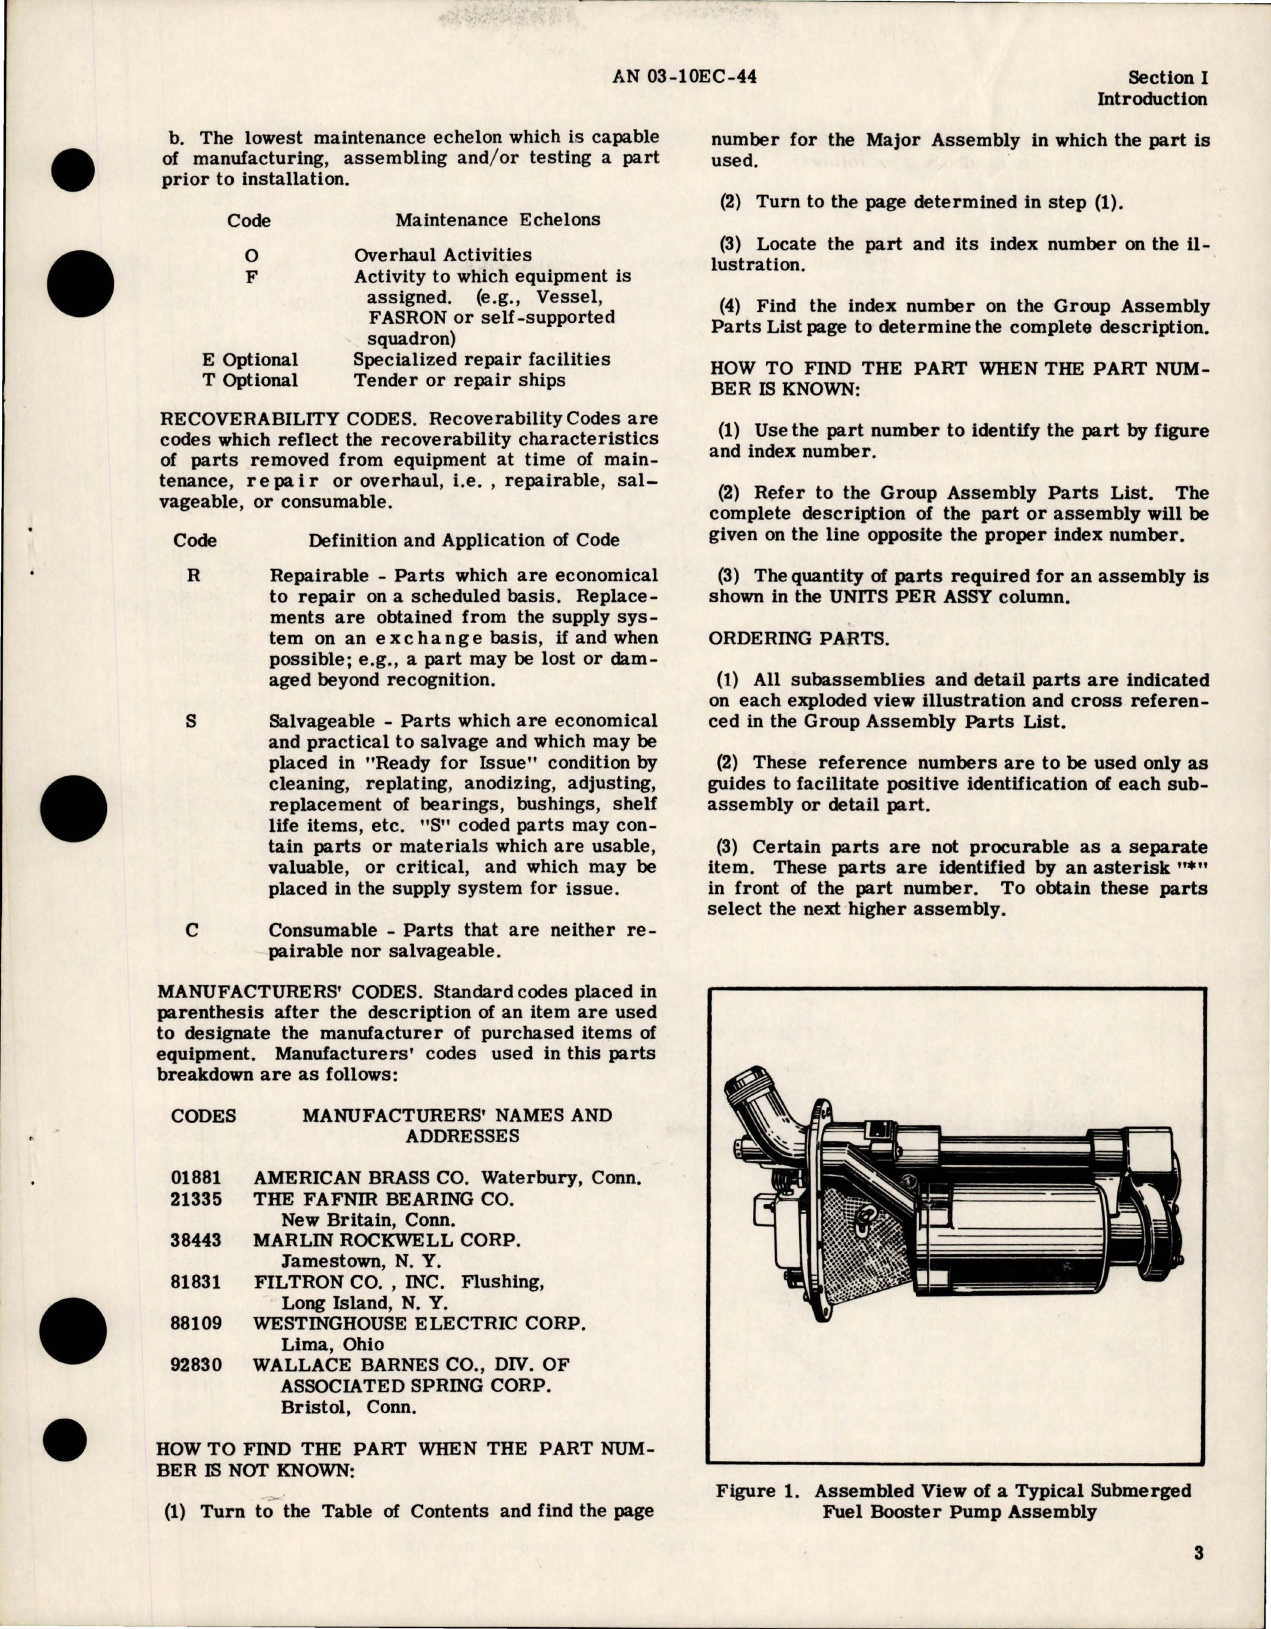 Sample page 5 from AirCorps Library document: Illustrated Parts Breakdown for Double Ended Submerged Fuel Booster Pump